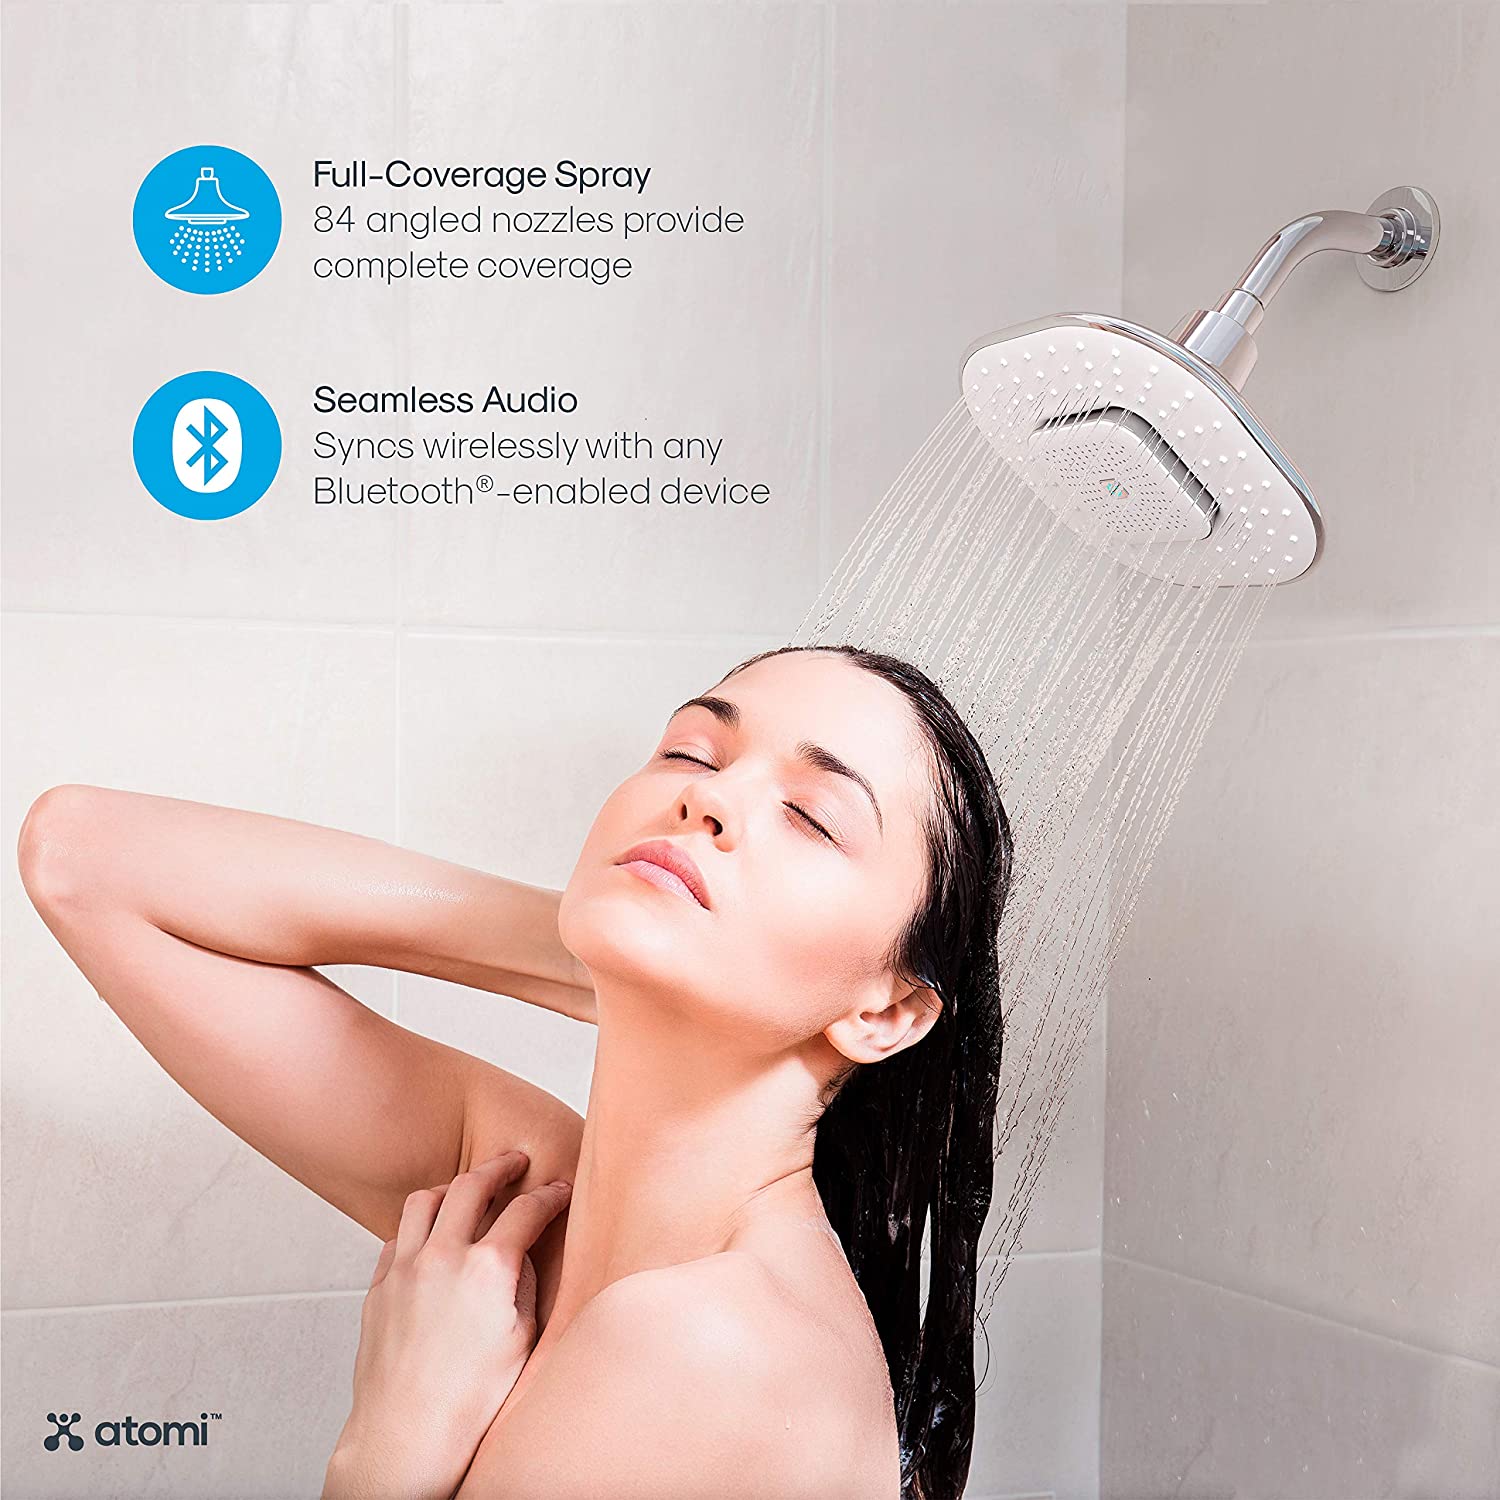 Atomi 4.9” White Showerhead With Removable, Magnetic Bluetooth Speaker – AT1490, 1 Pk - image 5 of 8